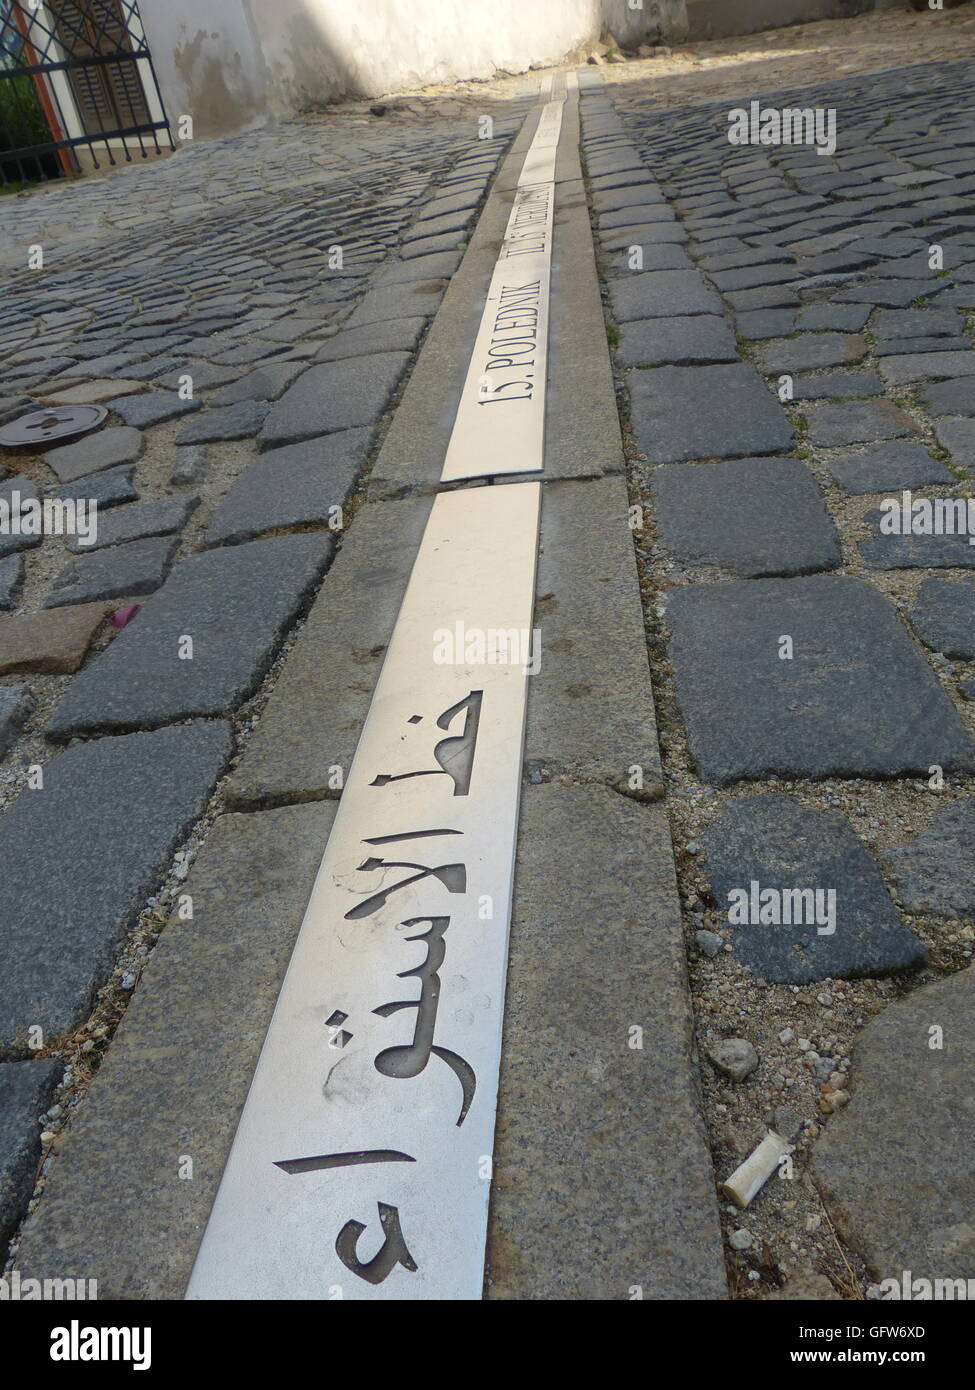 15th Longitude, Arabic language, geography, marked on road, running through, East 15 Longitude, east of Greenwhich, geographic Stock Photo